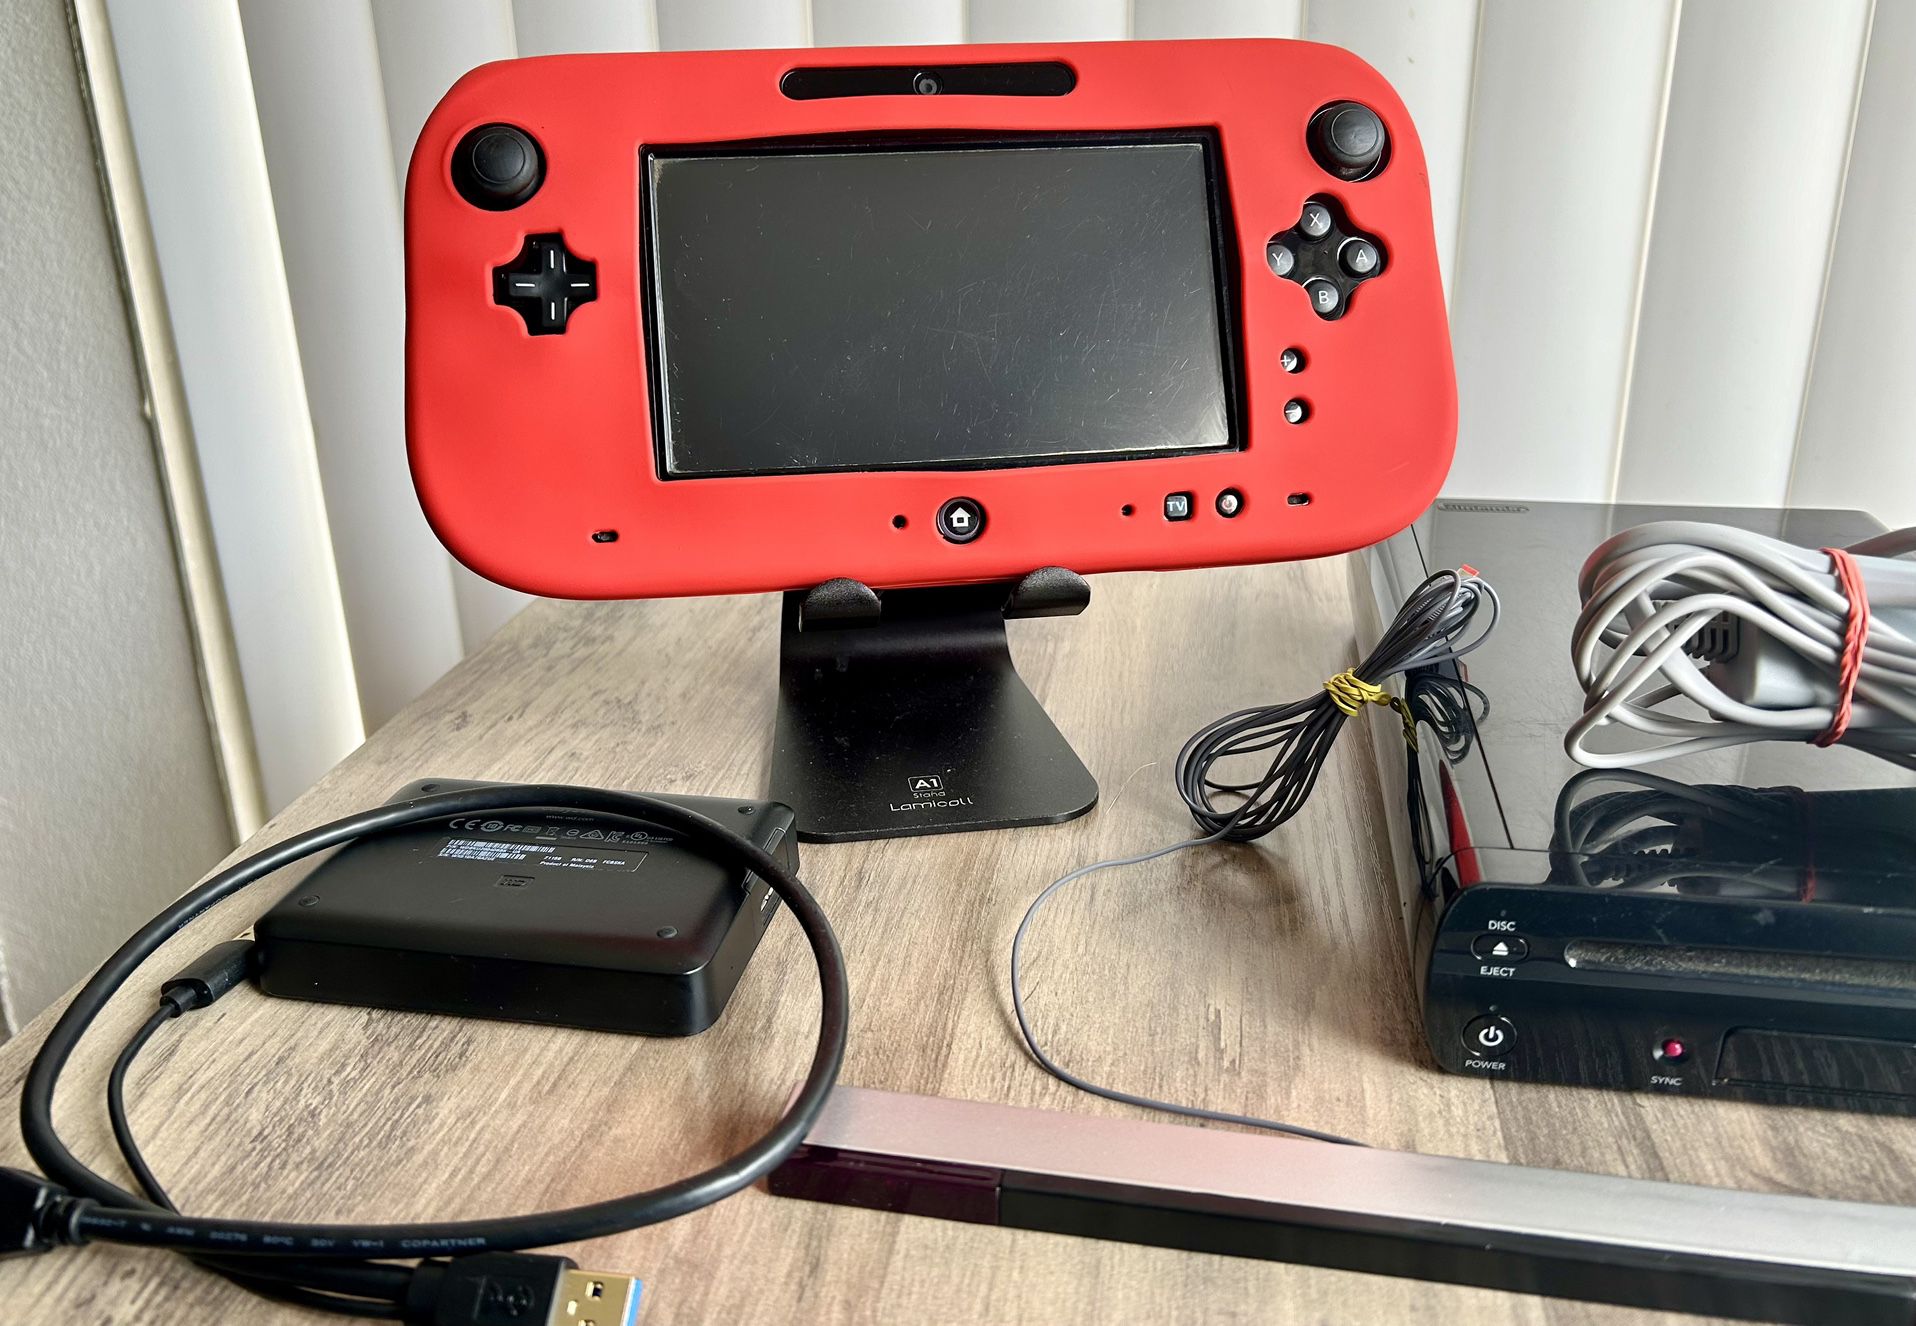 Modded Wii U System W/ Complete Wii library